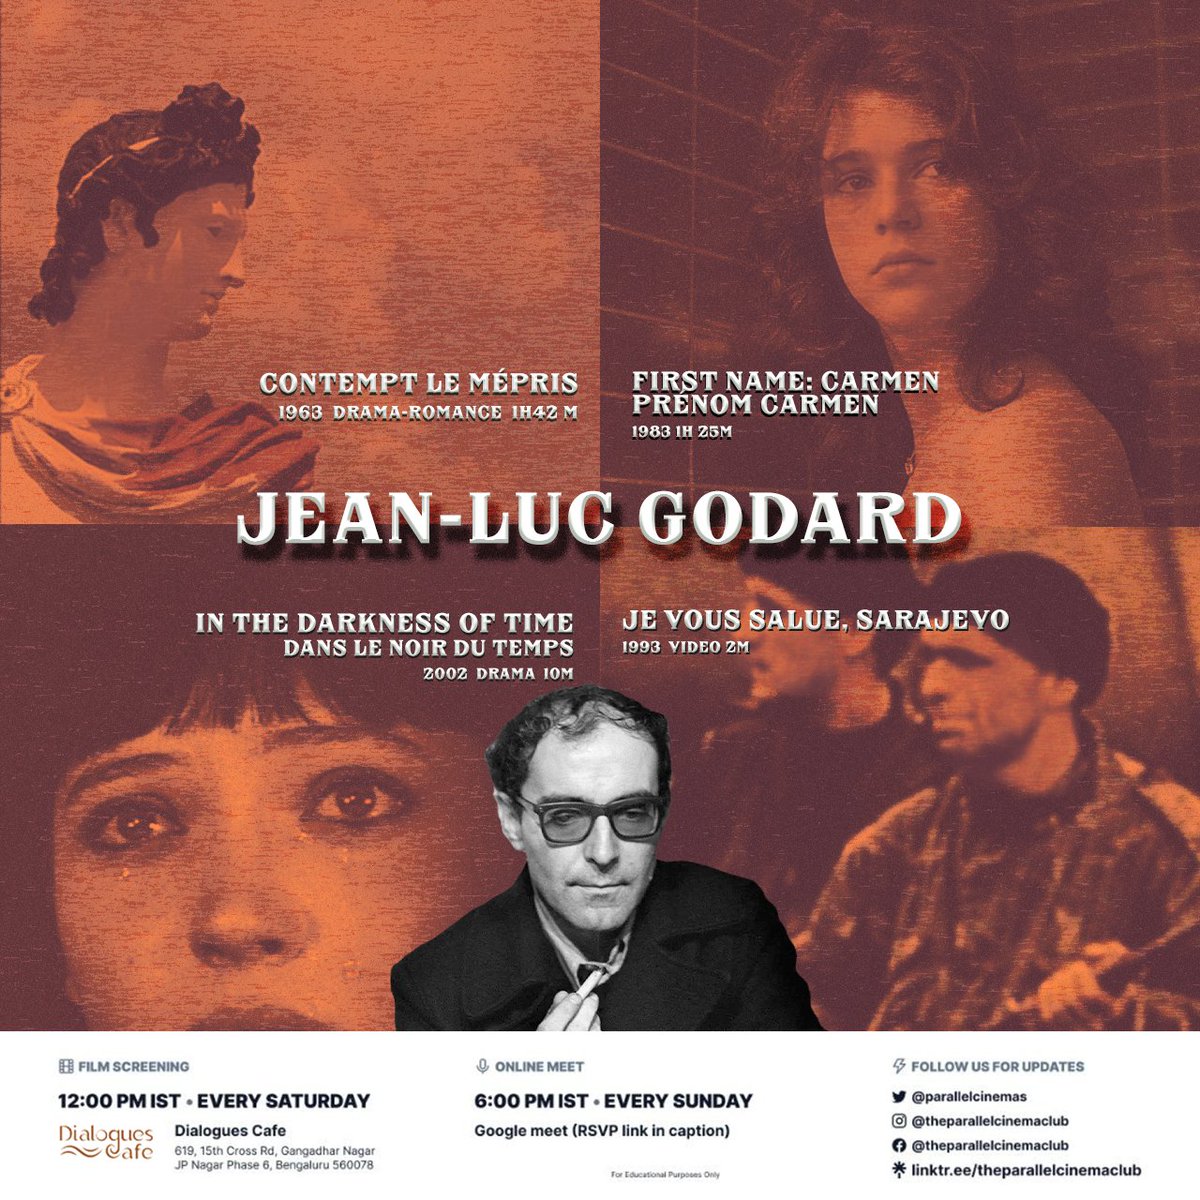 THE FRENCH NEW WAVE

'Contempt' 'First name Carmen' 'In the darkness of time' 'Hail Sarajevo', Sat, 3 JUN, Dialogues, JP Nagar

RSVP Link in Bio

#frenchnewwave #jeanlucgodard #claudechabrol #jacquesrivette #ericrohmer #cahiersducinema #frenchcinema #bangalore #franciostruffaut